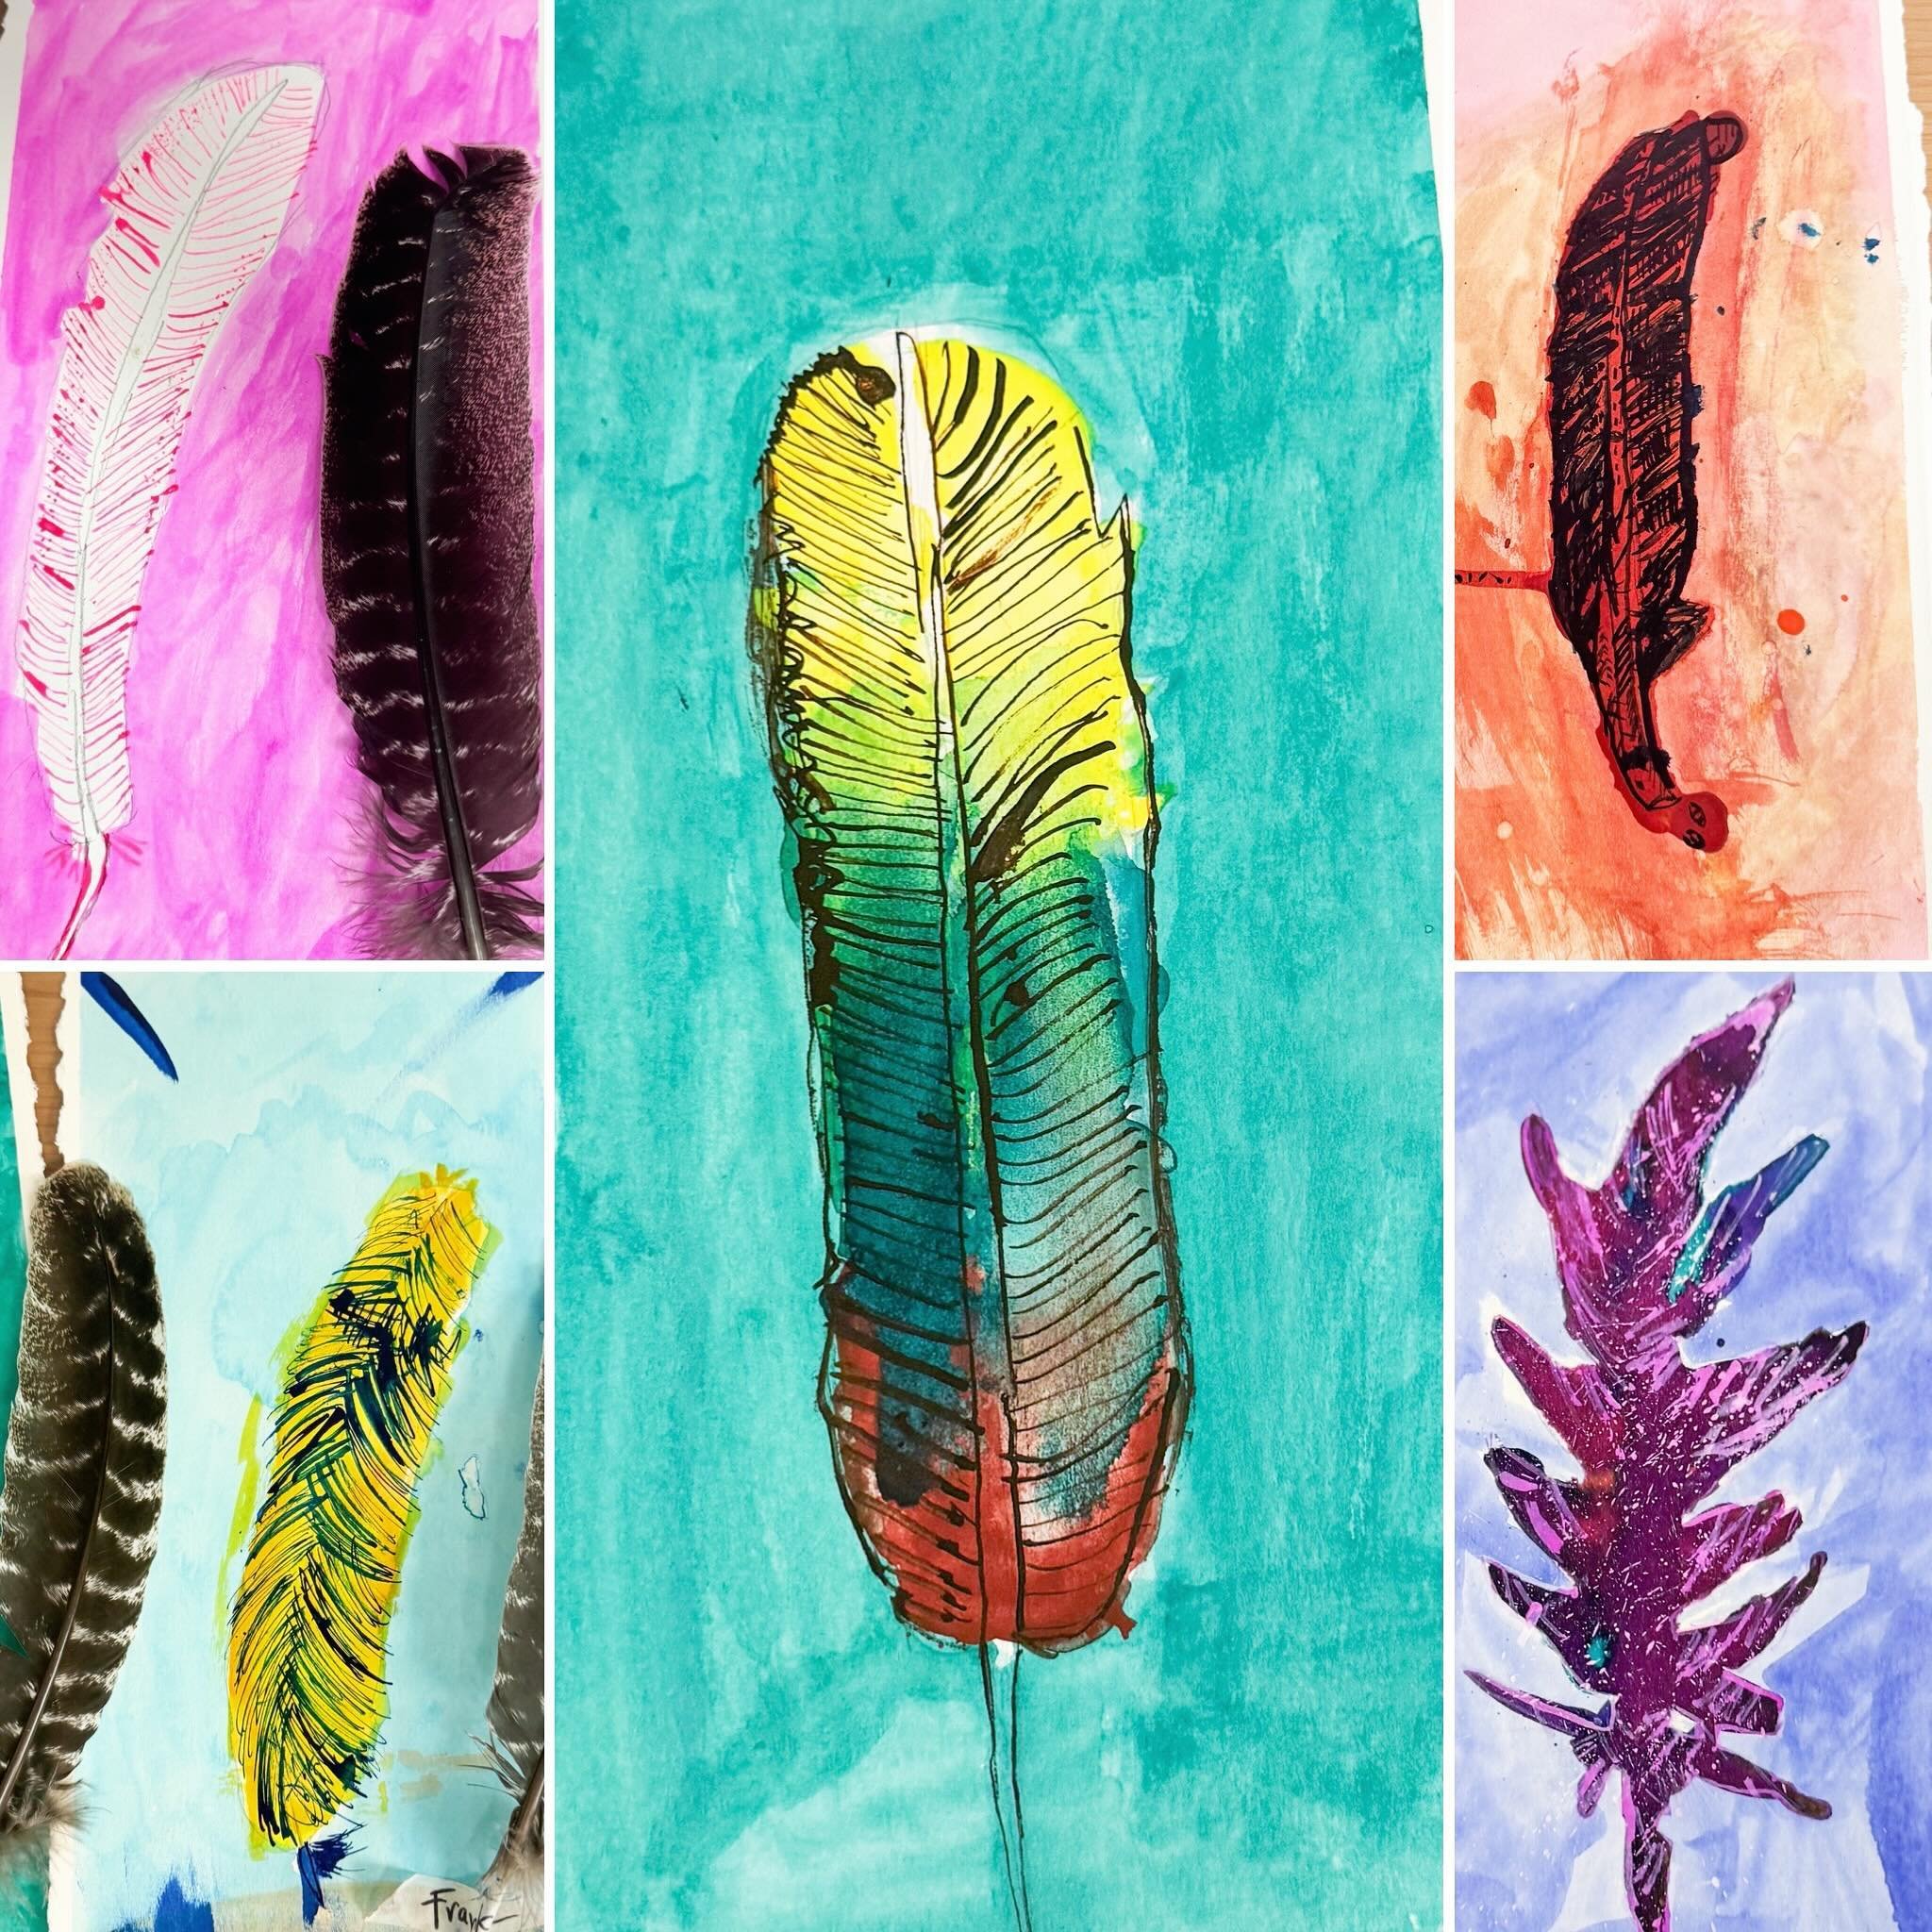 Feather studies in watercolor and ink. Art foundations students nailed these yesterday! I can&rsquo;t wait to see what the classes today complete. 

#artistsoninstagram #artteachers #kidsactivities #kidsart #processart #choicebasedart #fineartforkids